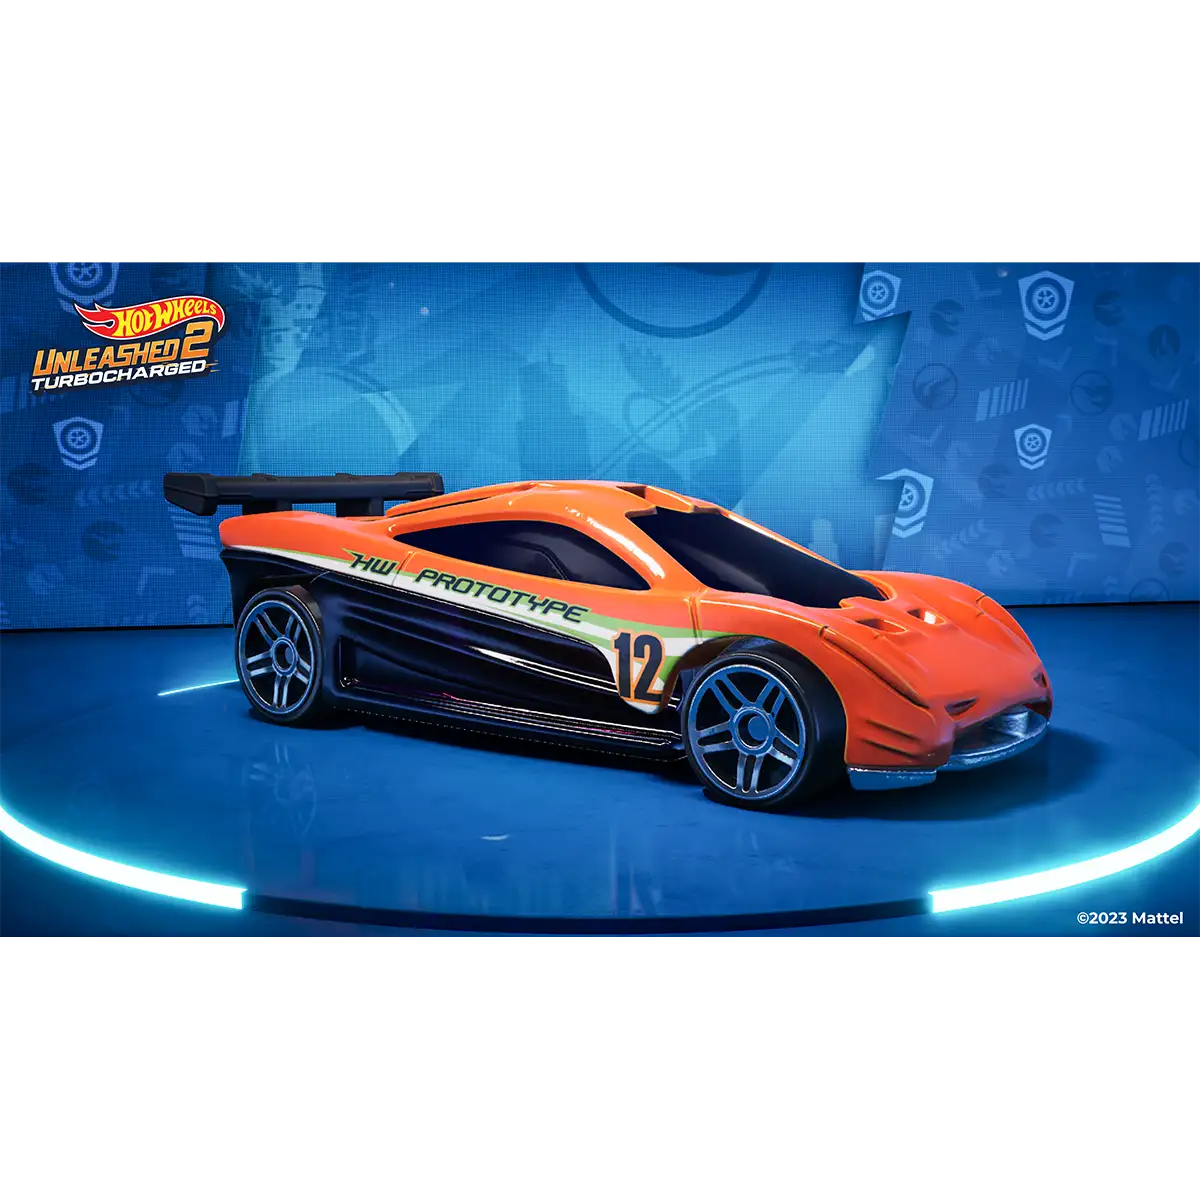 Hot Wheels Unleashed 2 Turbocharged Pure Fire Edition (PS5) Image 6